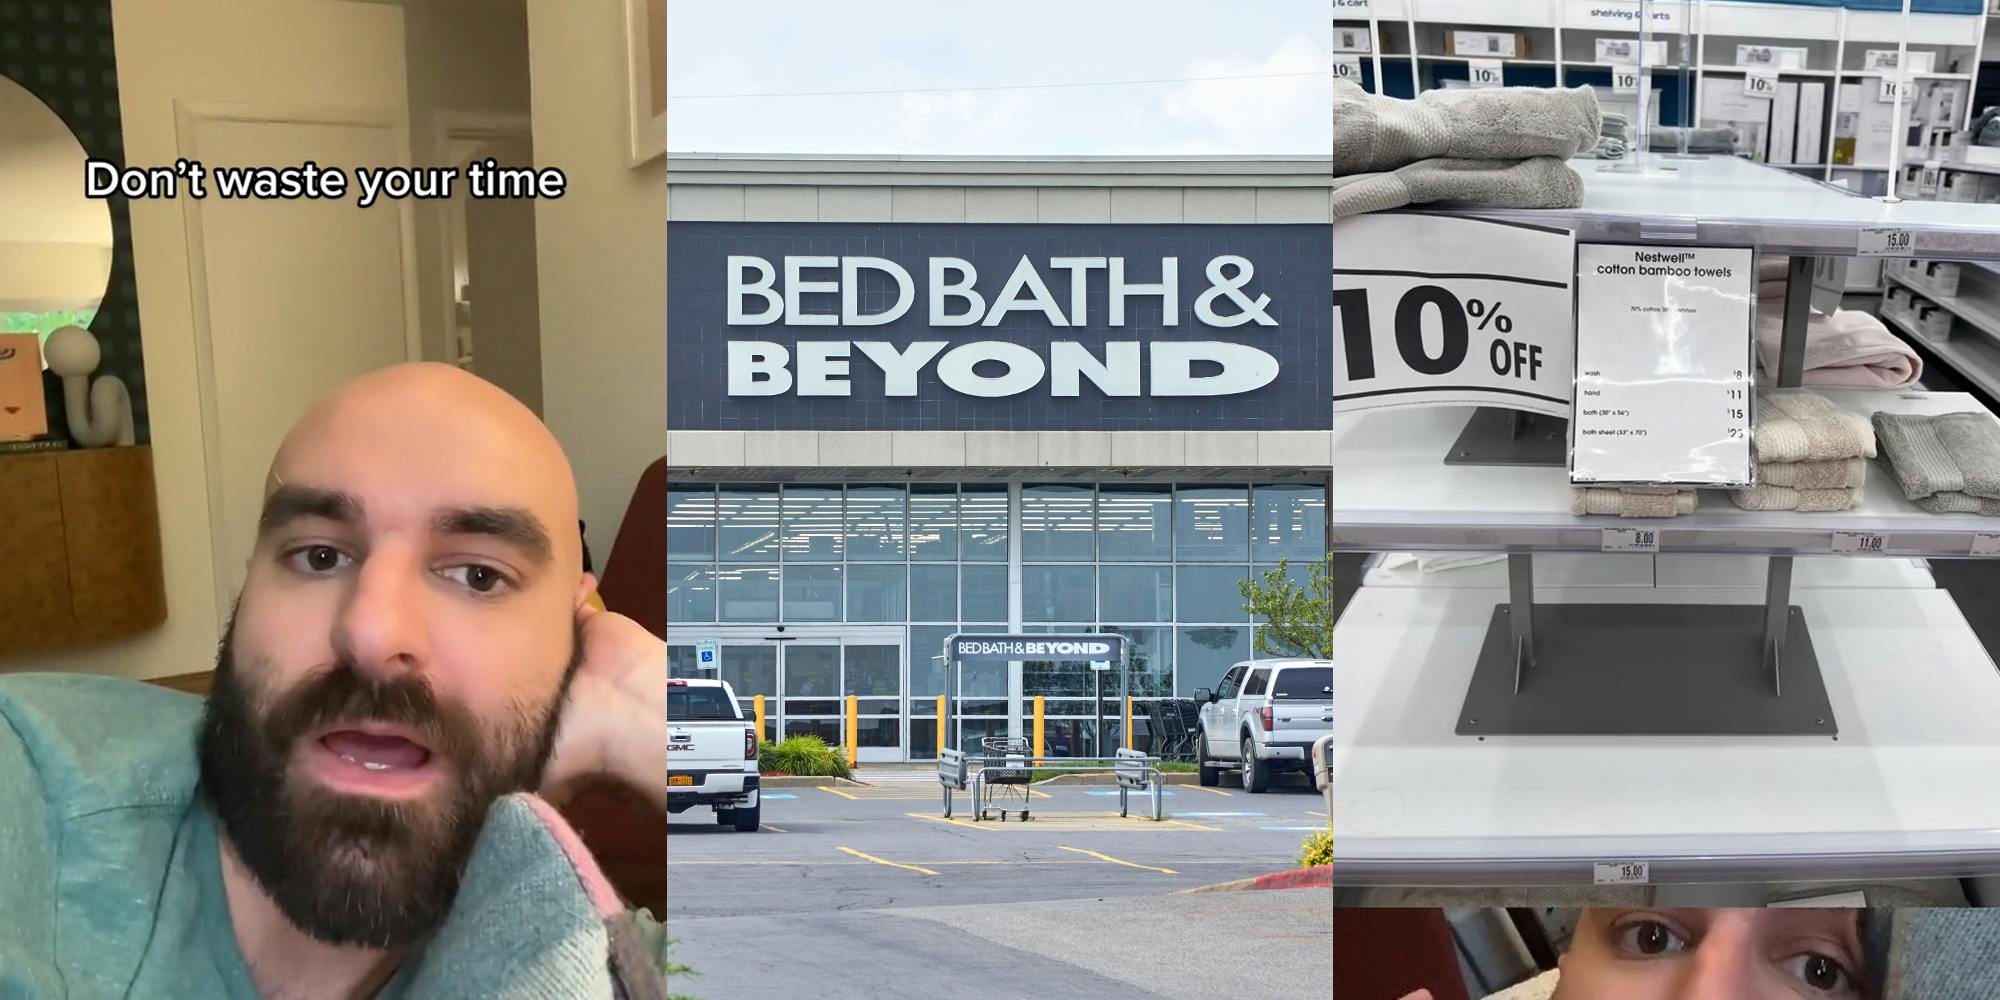 Bed Bath and Beyond customer speaking with caption "Don't waste your time" (l) Bed Bath and Beyond building with sign (c) Bed Bath and Beyond image of sale with 10% off paper (r)